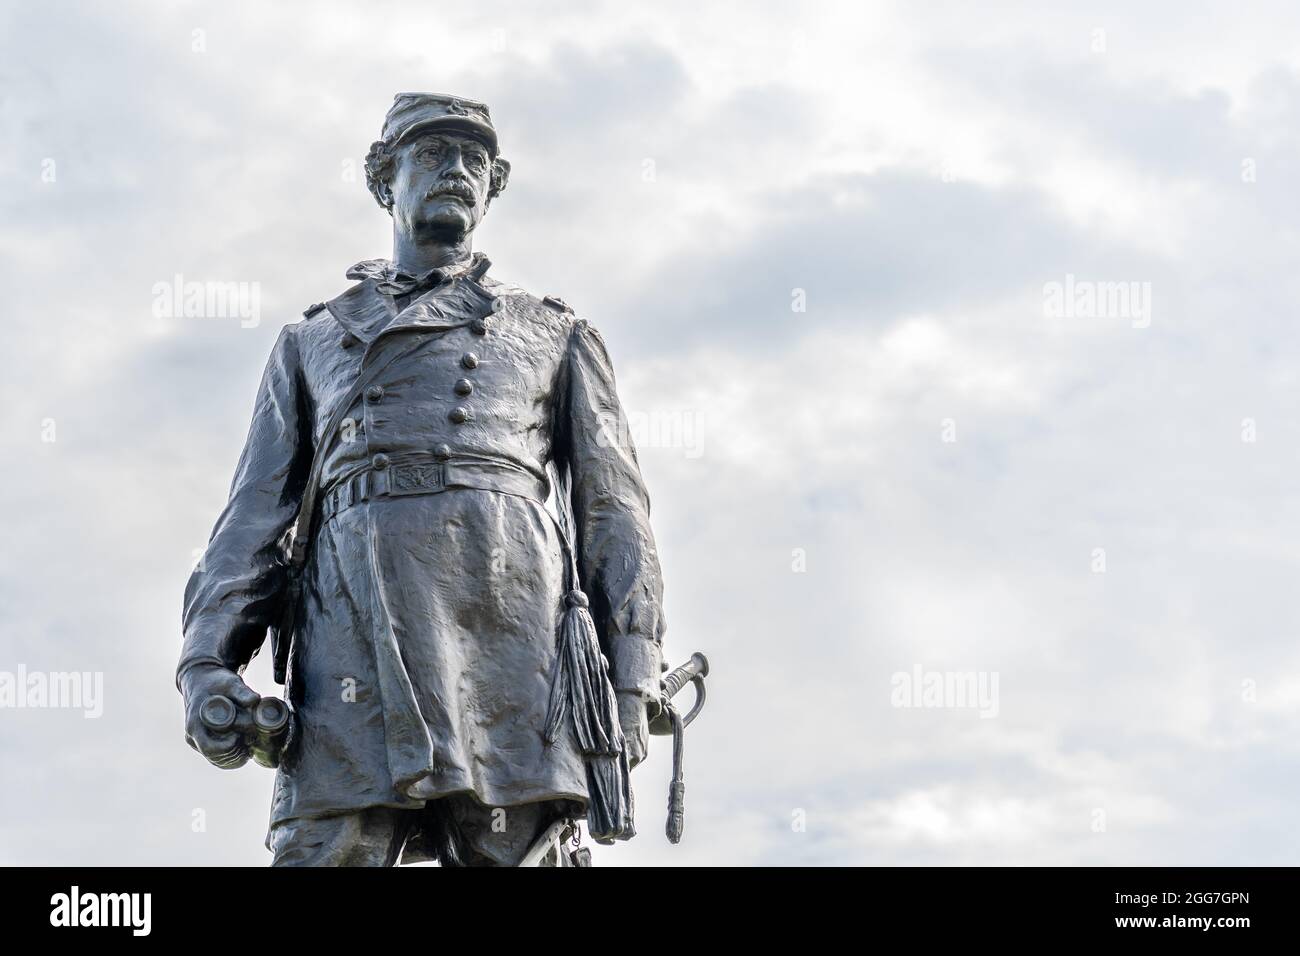 Gettysburg, PA - Sept. 9, 2020: This statue of Major General Abner Doubleday is by John Massey Rhind. Gen. Doubleday fired the first shot in defense o Stock Photo